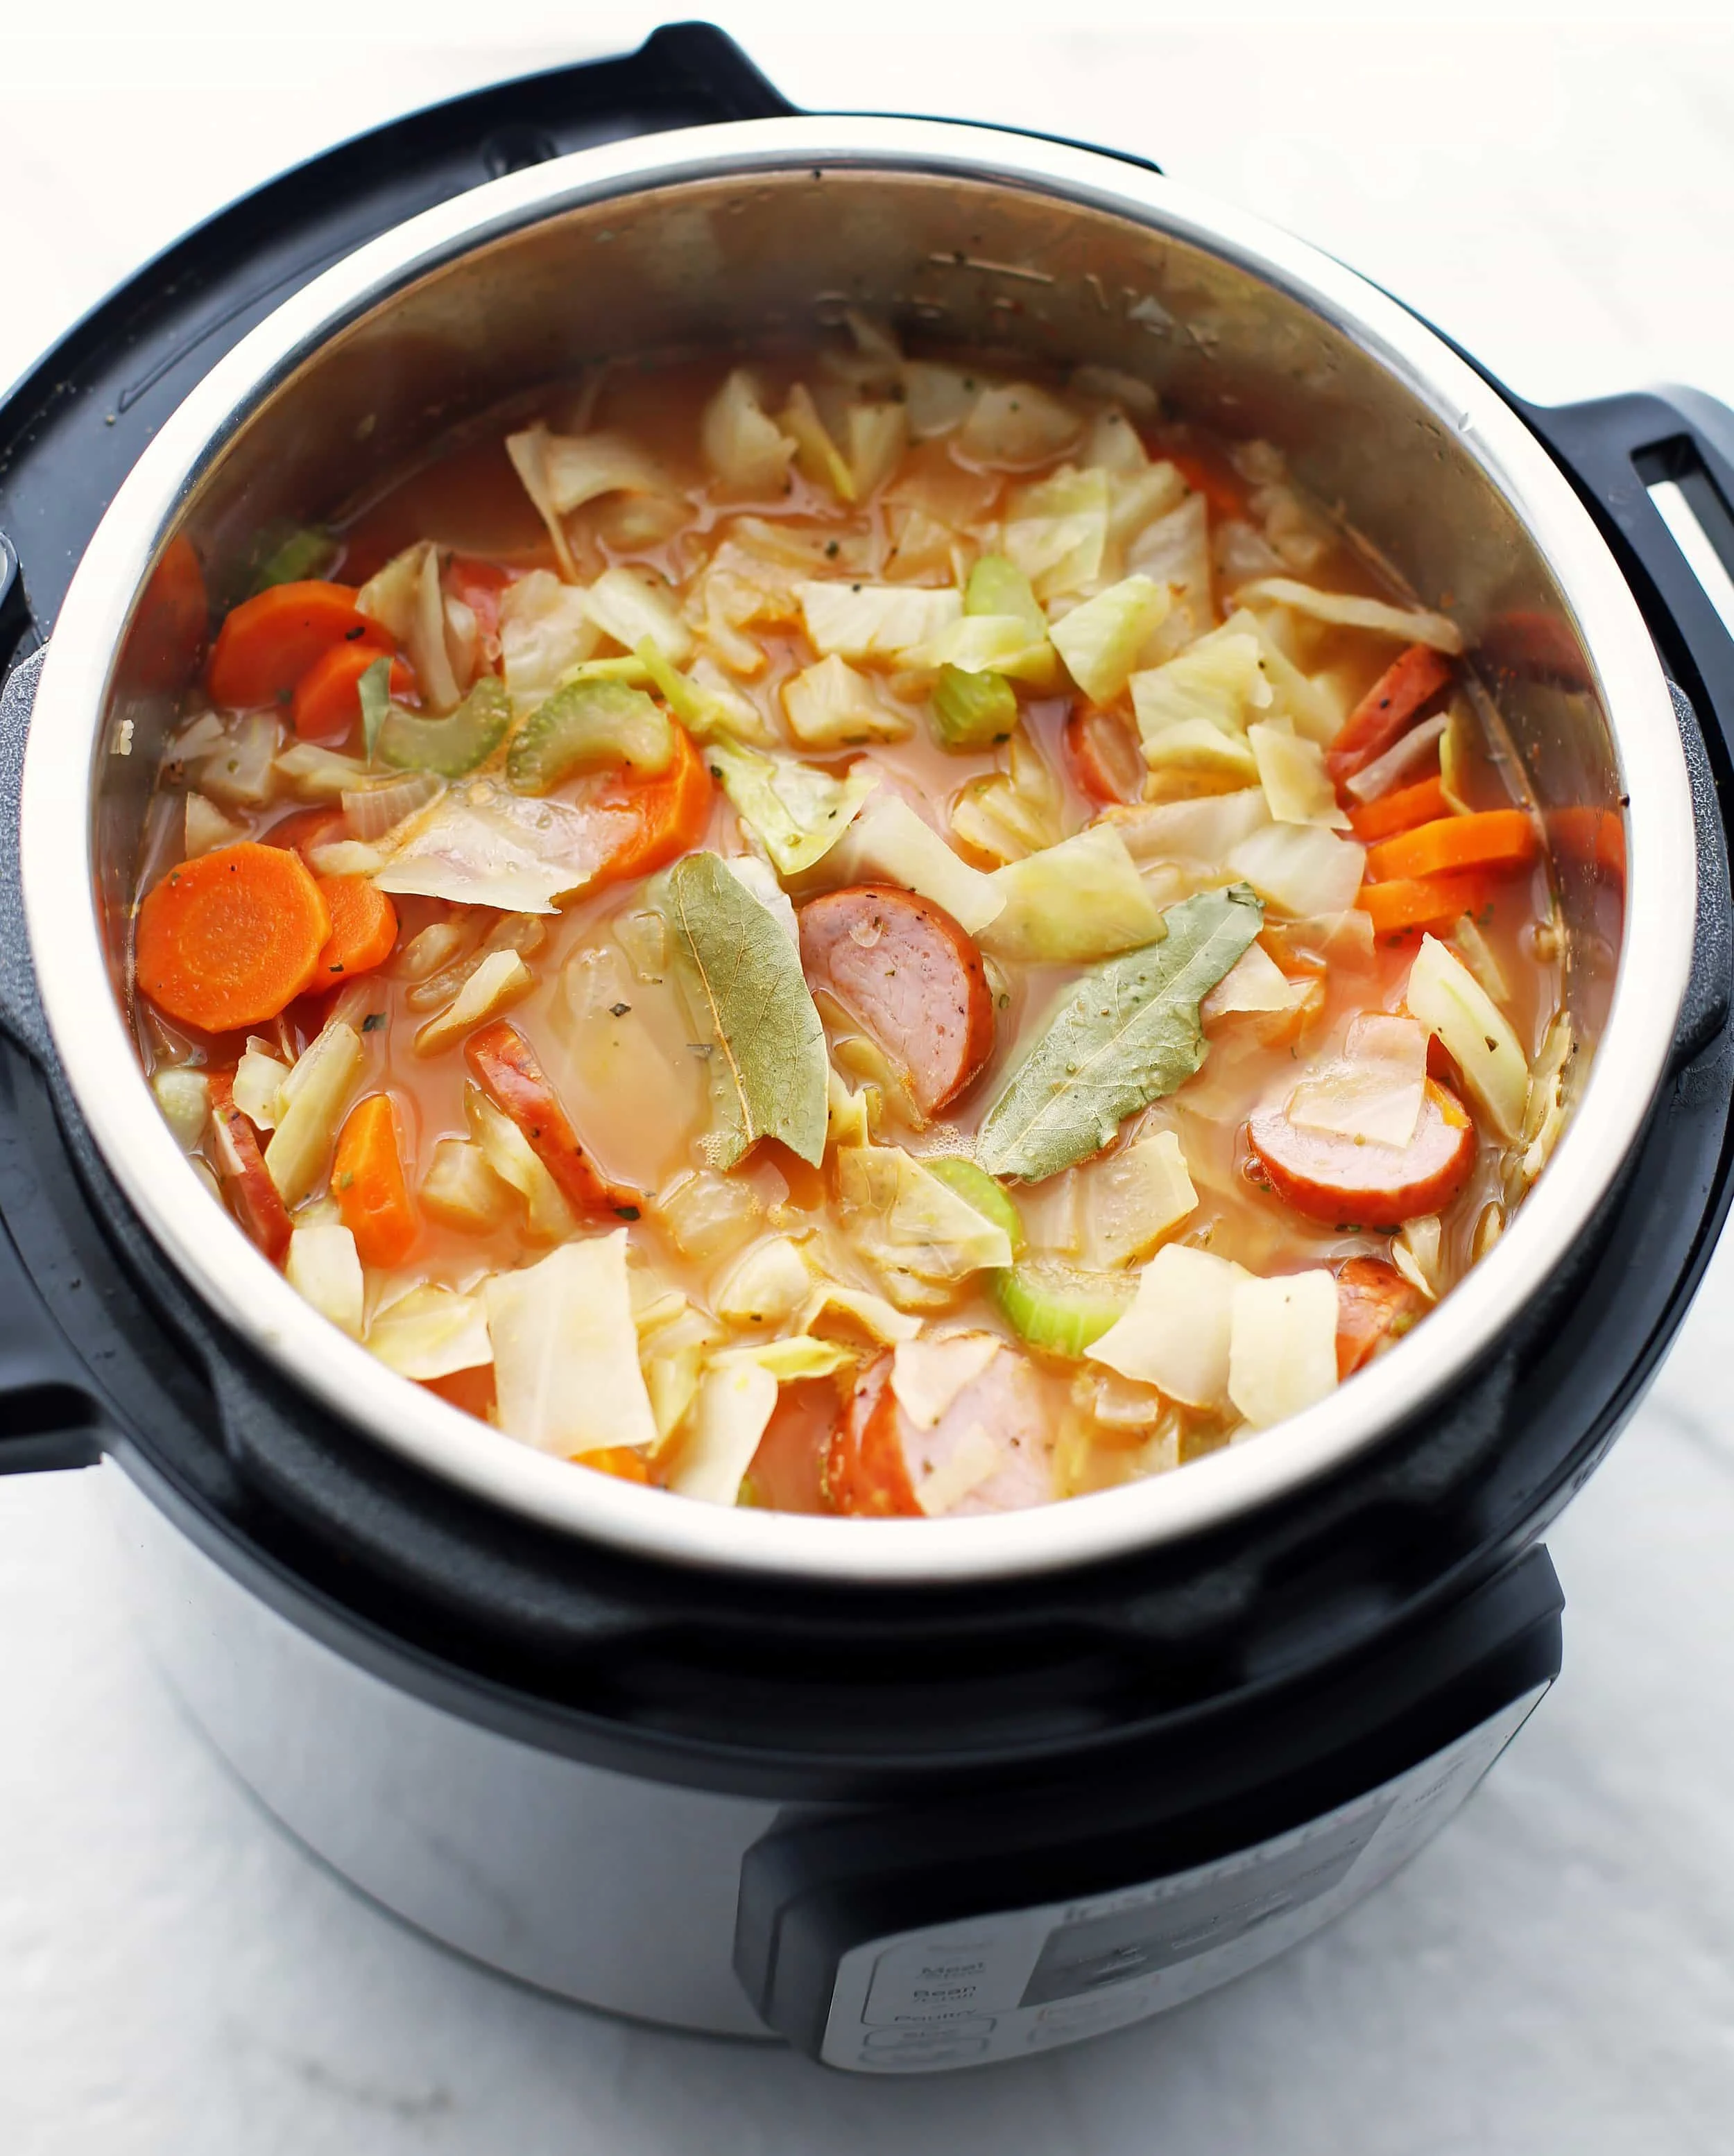 Prepared ingredients for fennel, cabbage, and sausage soup placed in the Instant Pot, which includes carrots, celery, onions.